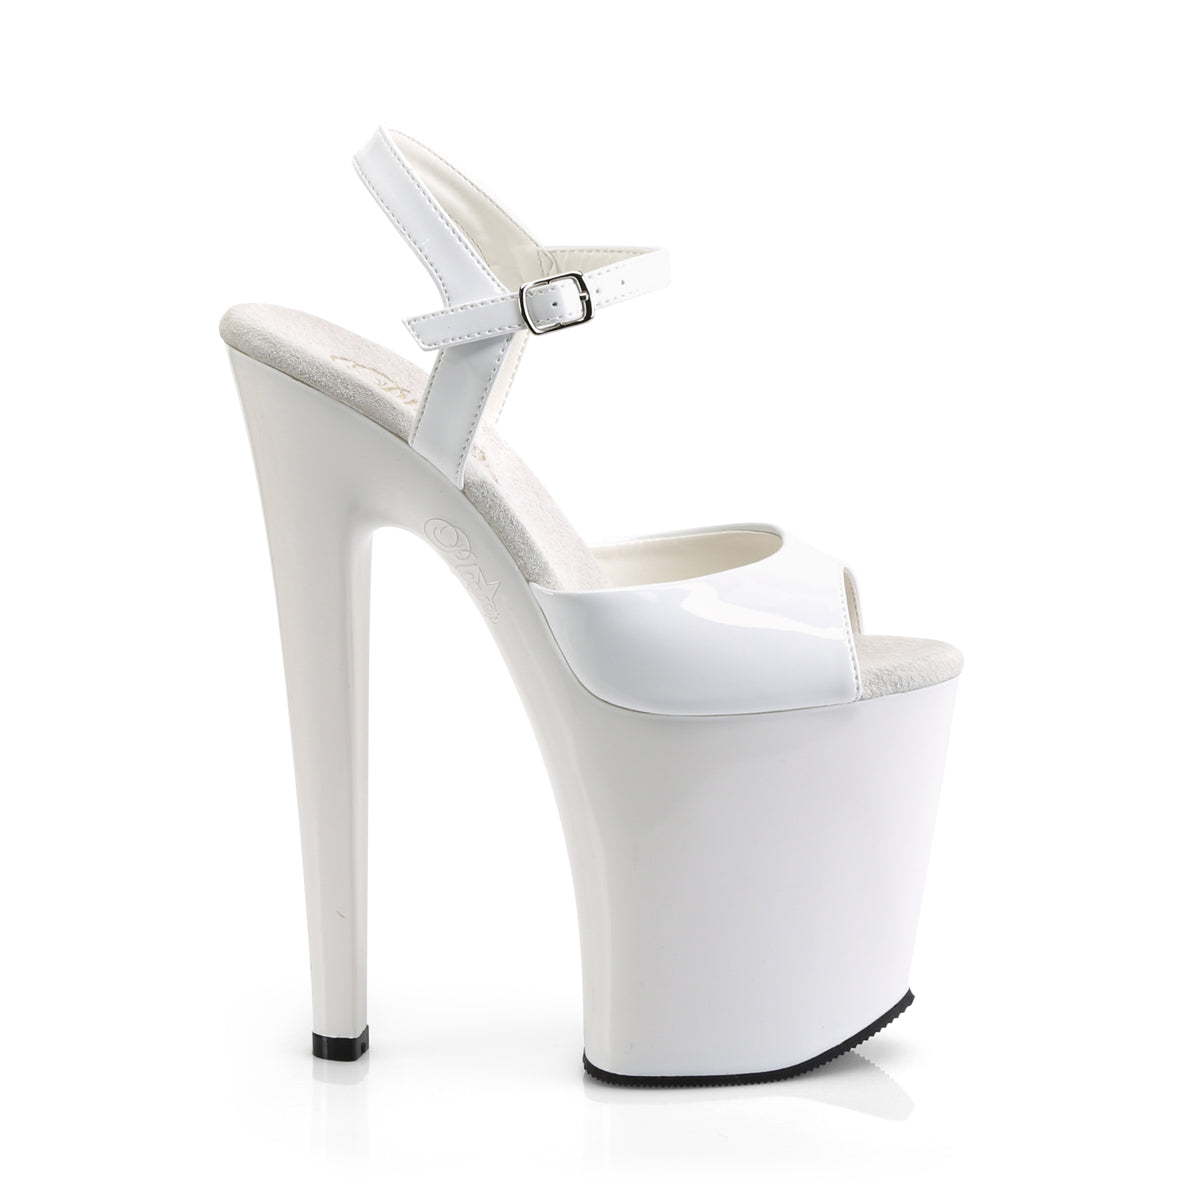 XTREME-809 Pleaser White Patent/White Platform Shoes [Exotic Dancing Shoes]